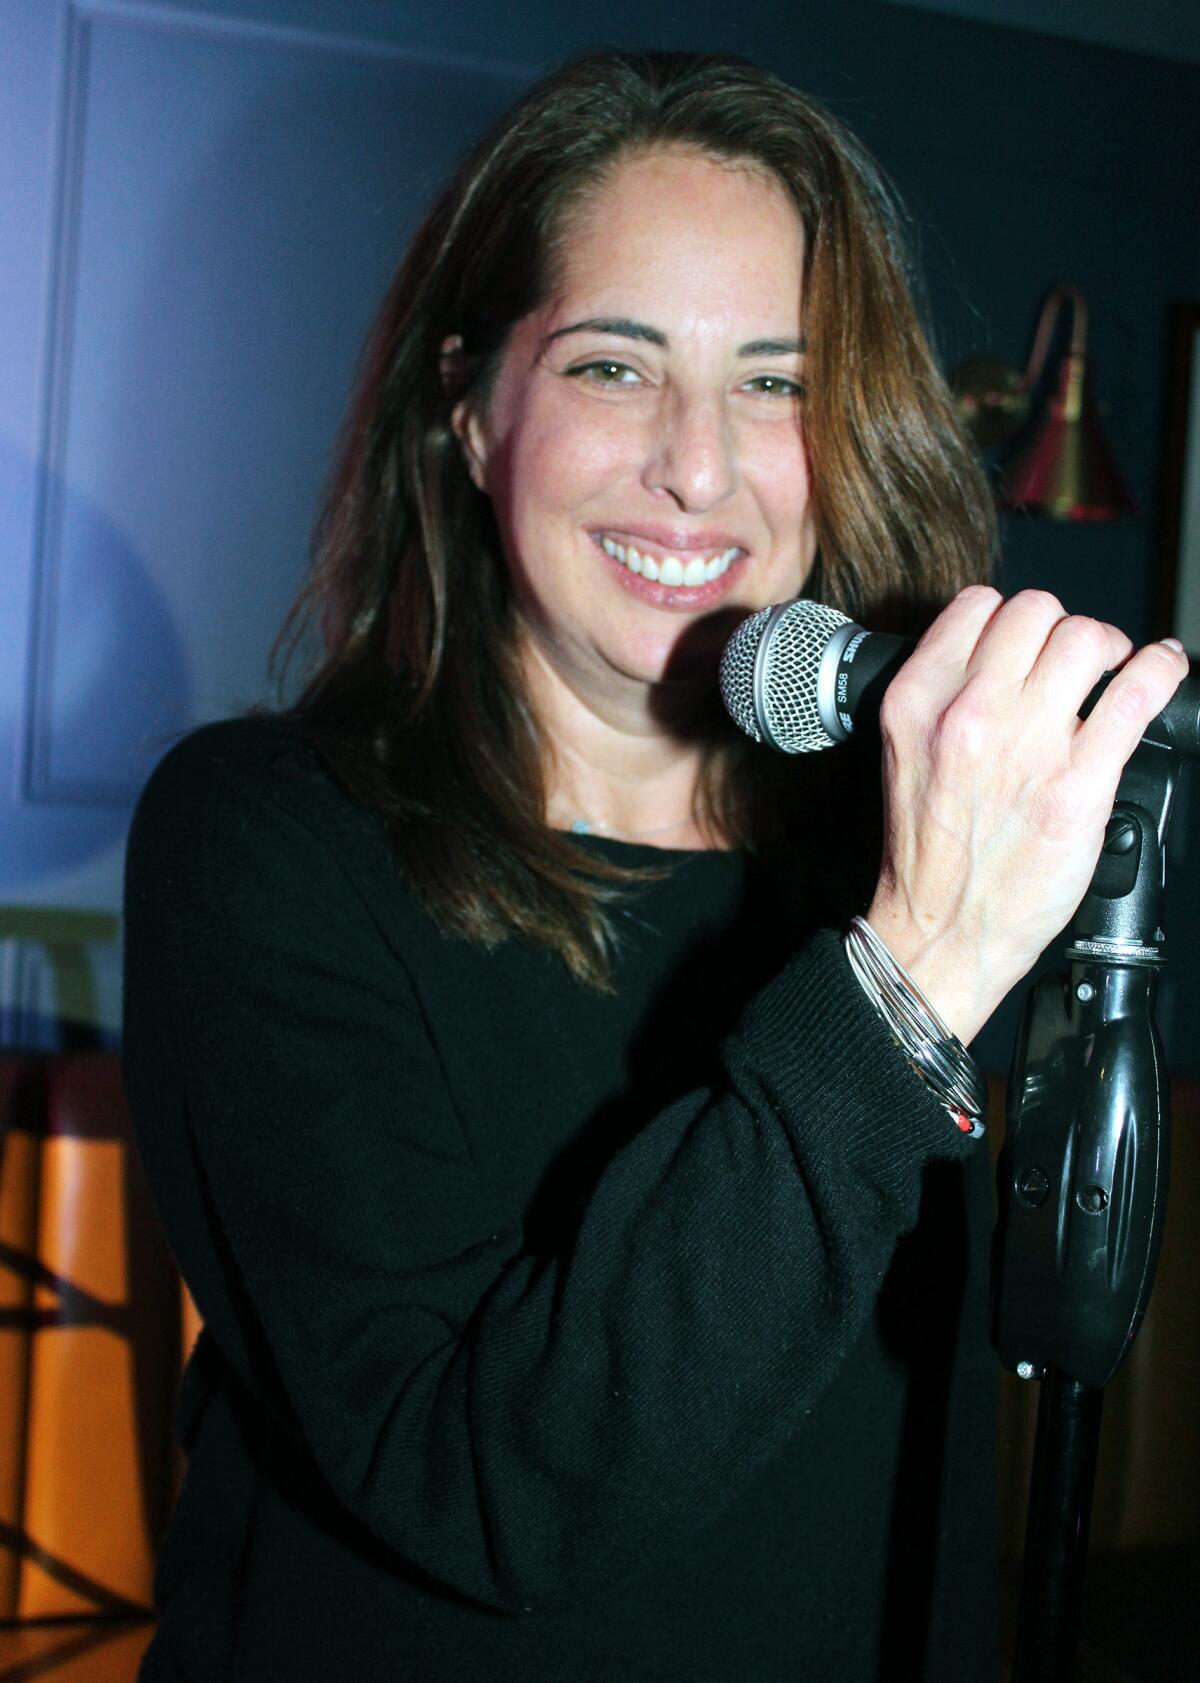 In happier times, Elissa Glickman, chief executive of Glendale Arts, takes over the mic during comedy night at Greyhound Bar & Grill in Glendale this past December.